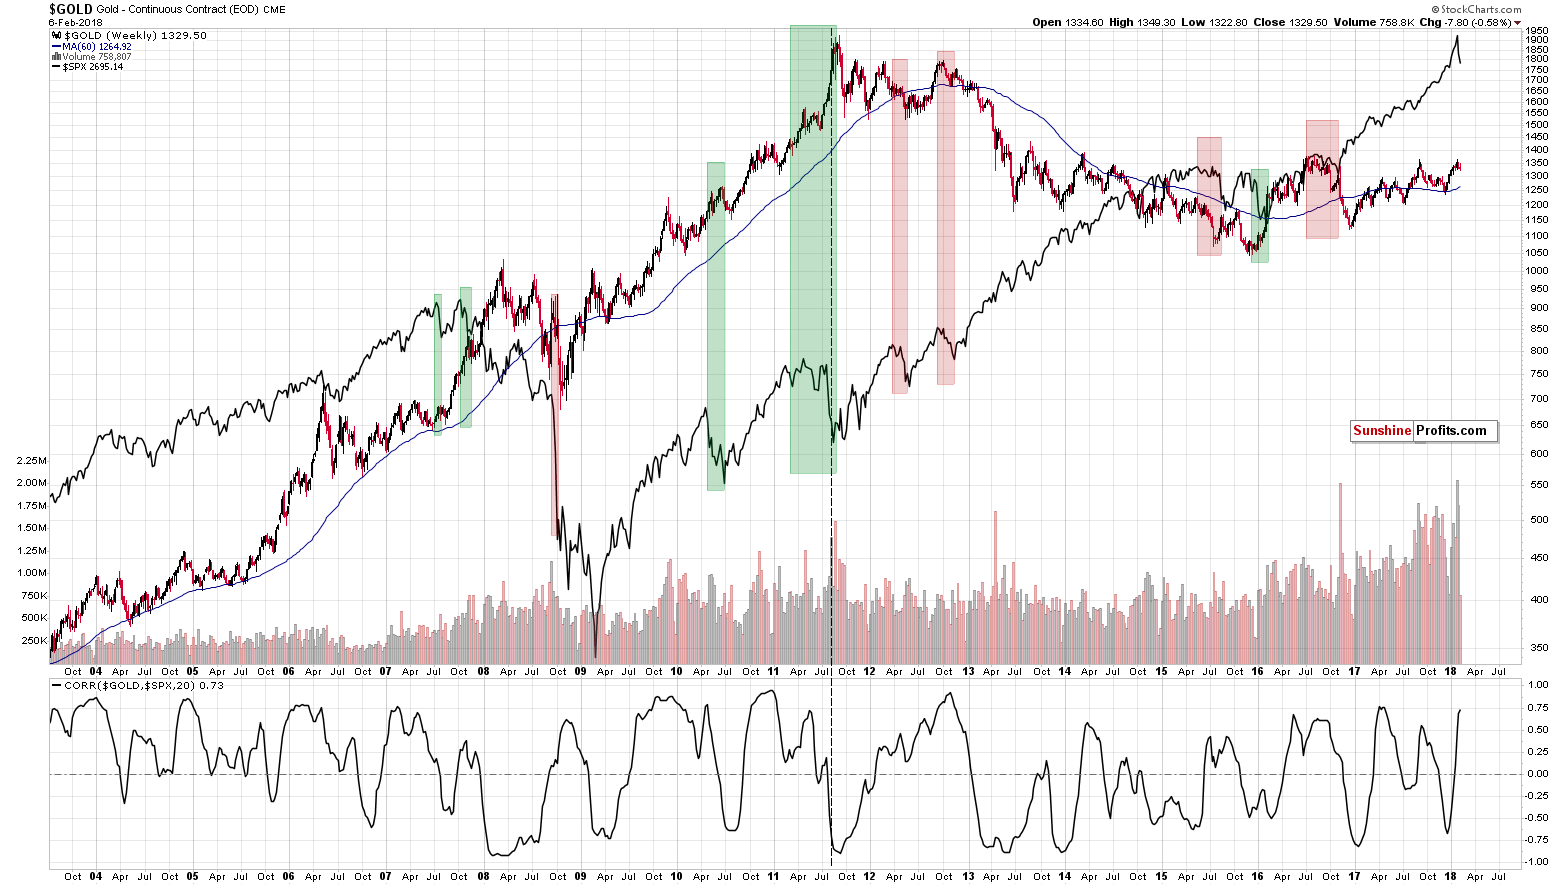 Gold price compared to stocks